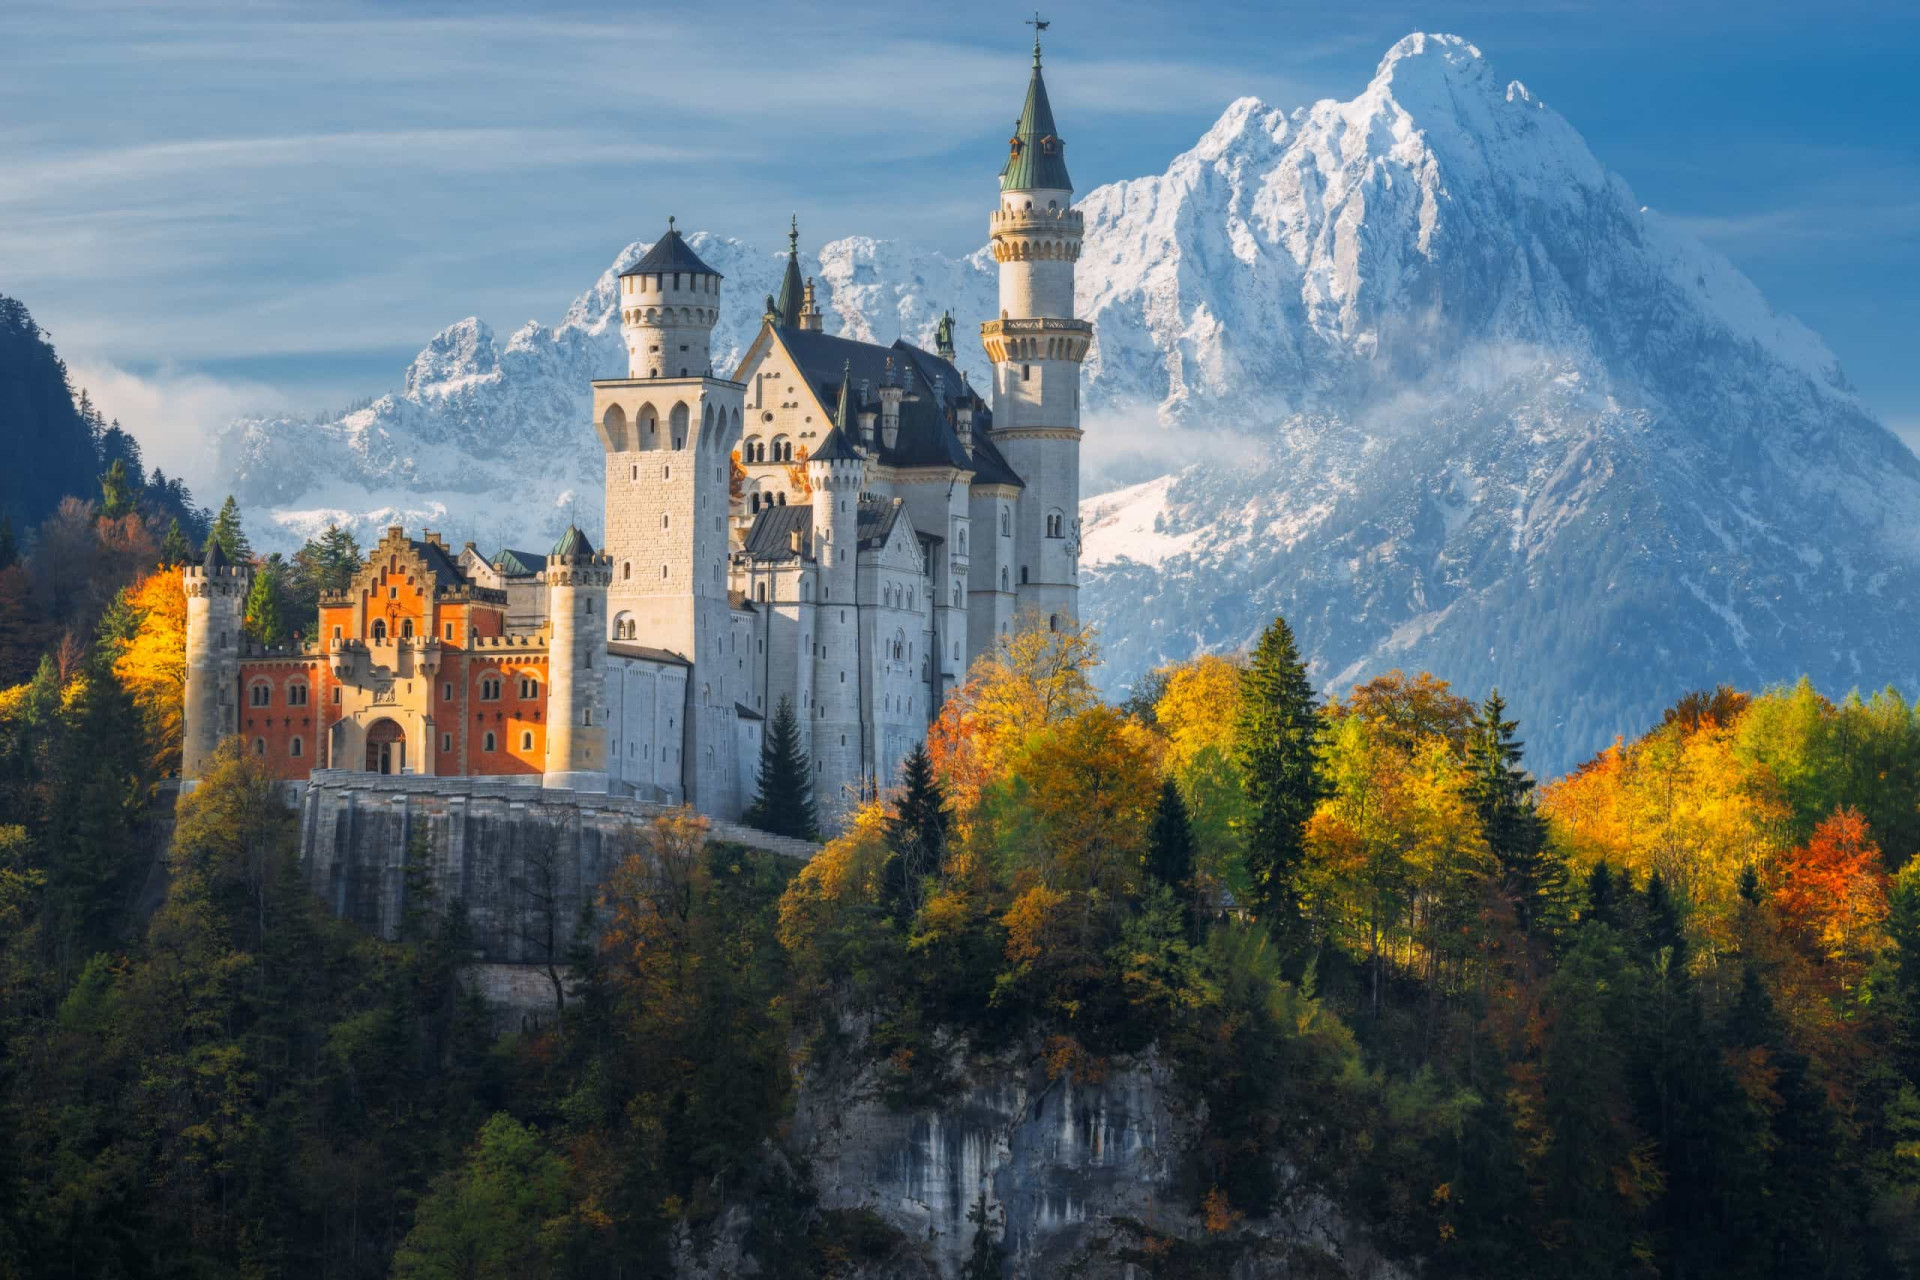 <p>Dating back to 1886, Neuschwanstein sits on a clifftop above the village of Hohenschwangau near Fussen in southwest Bavaria. Its spires and ornamental turrets served as inspiration for the Sleeping Beauty Castle at Disneyland.</p><p><a href="https://www.msn.com/en-us/community/channel/vid-7xx8mnucu55yw63we9va2gwr7uihbxwc68fxqp25x6tg4ftibpra?cvid=94631541bc0f4f89bfd59158d696ad7e">Follow us and access great exclusive content every day</a></p>